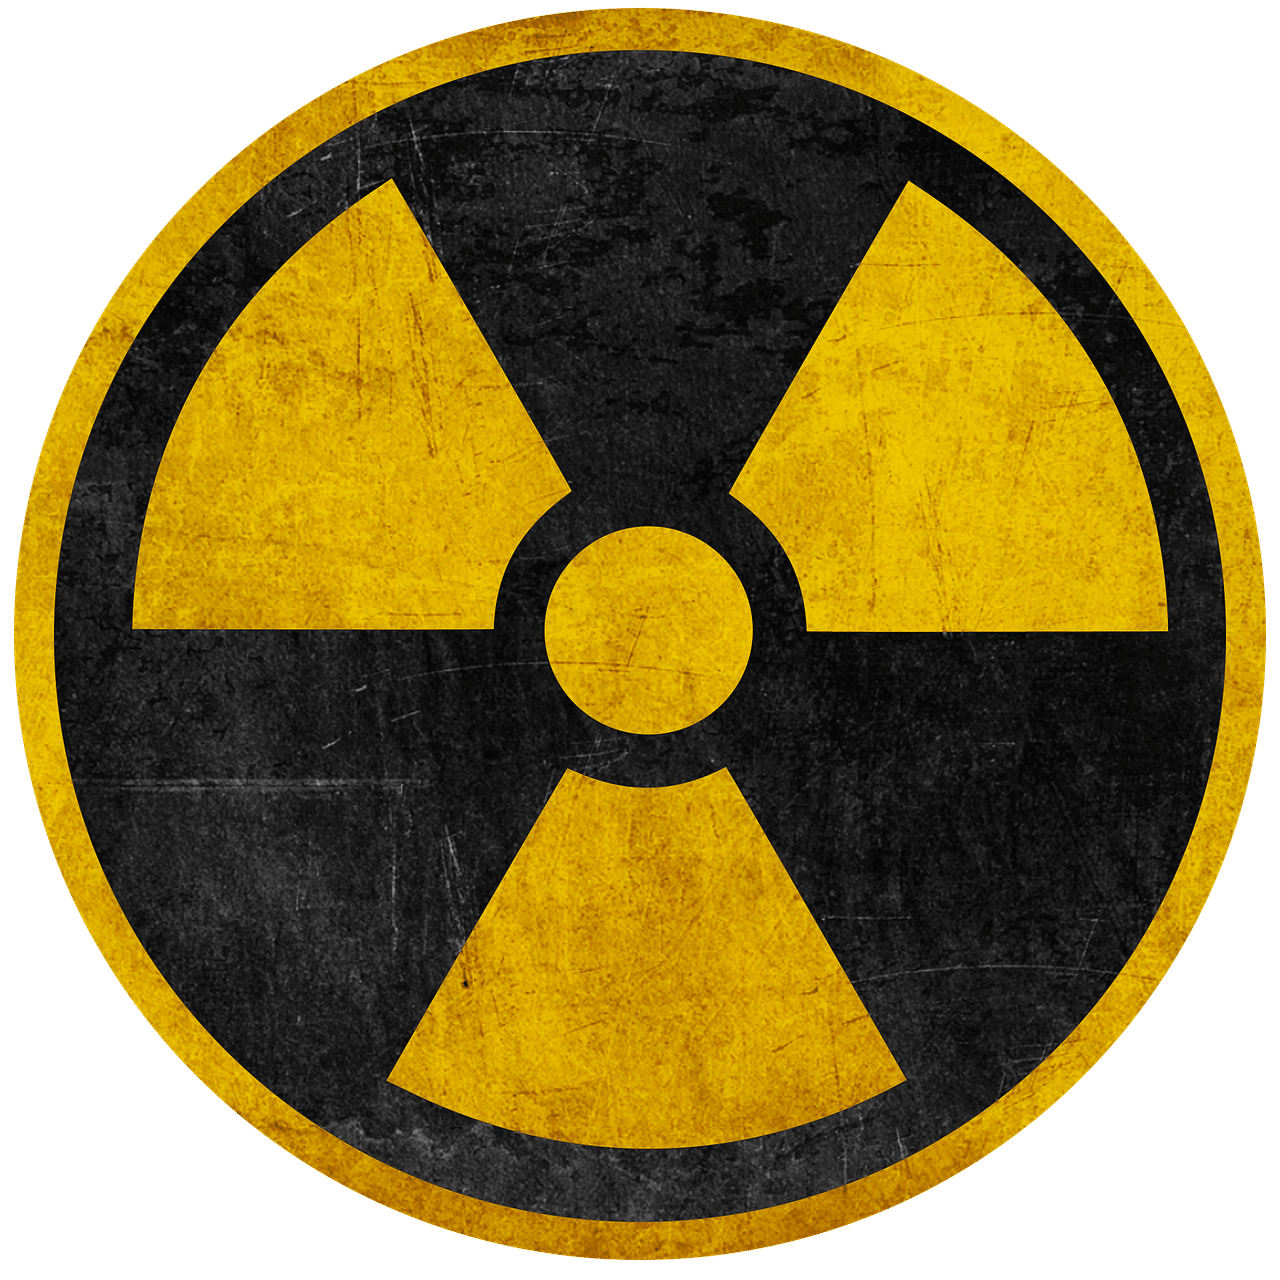 nucleaire 1564492966